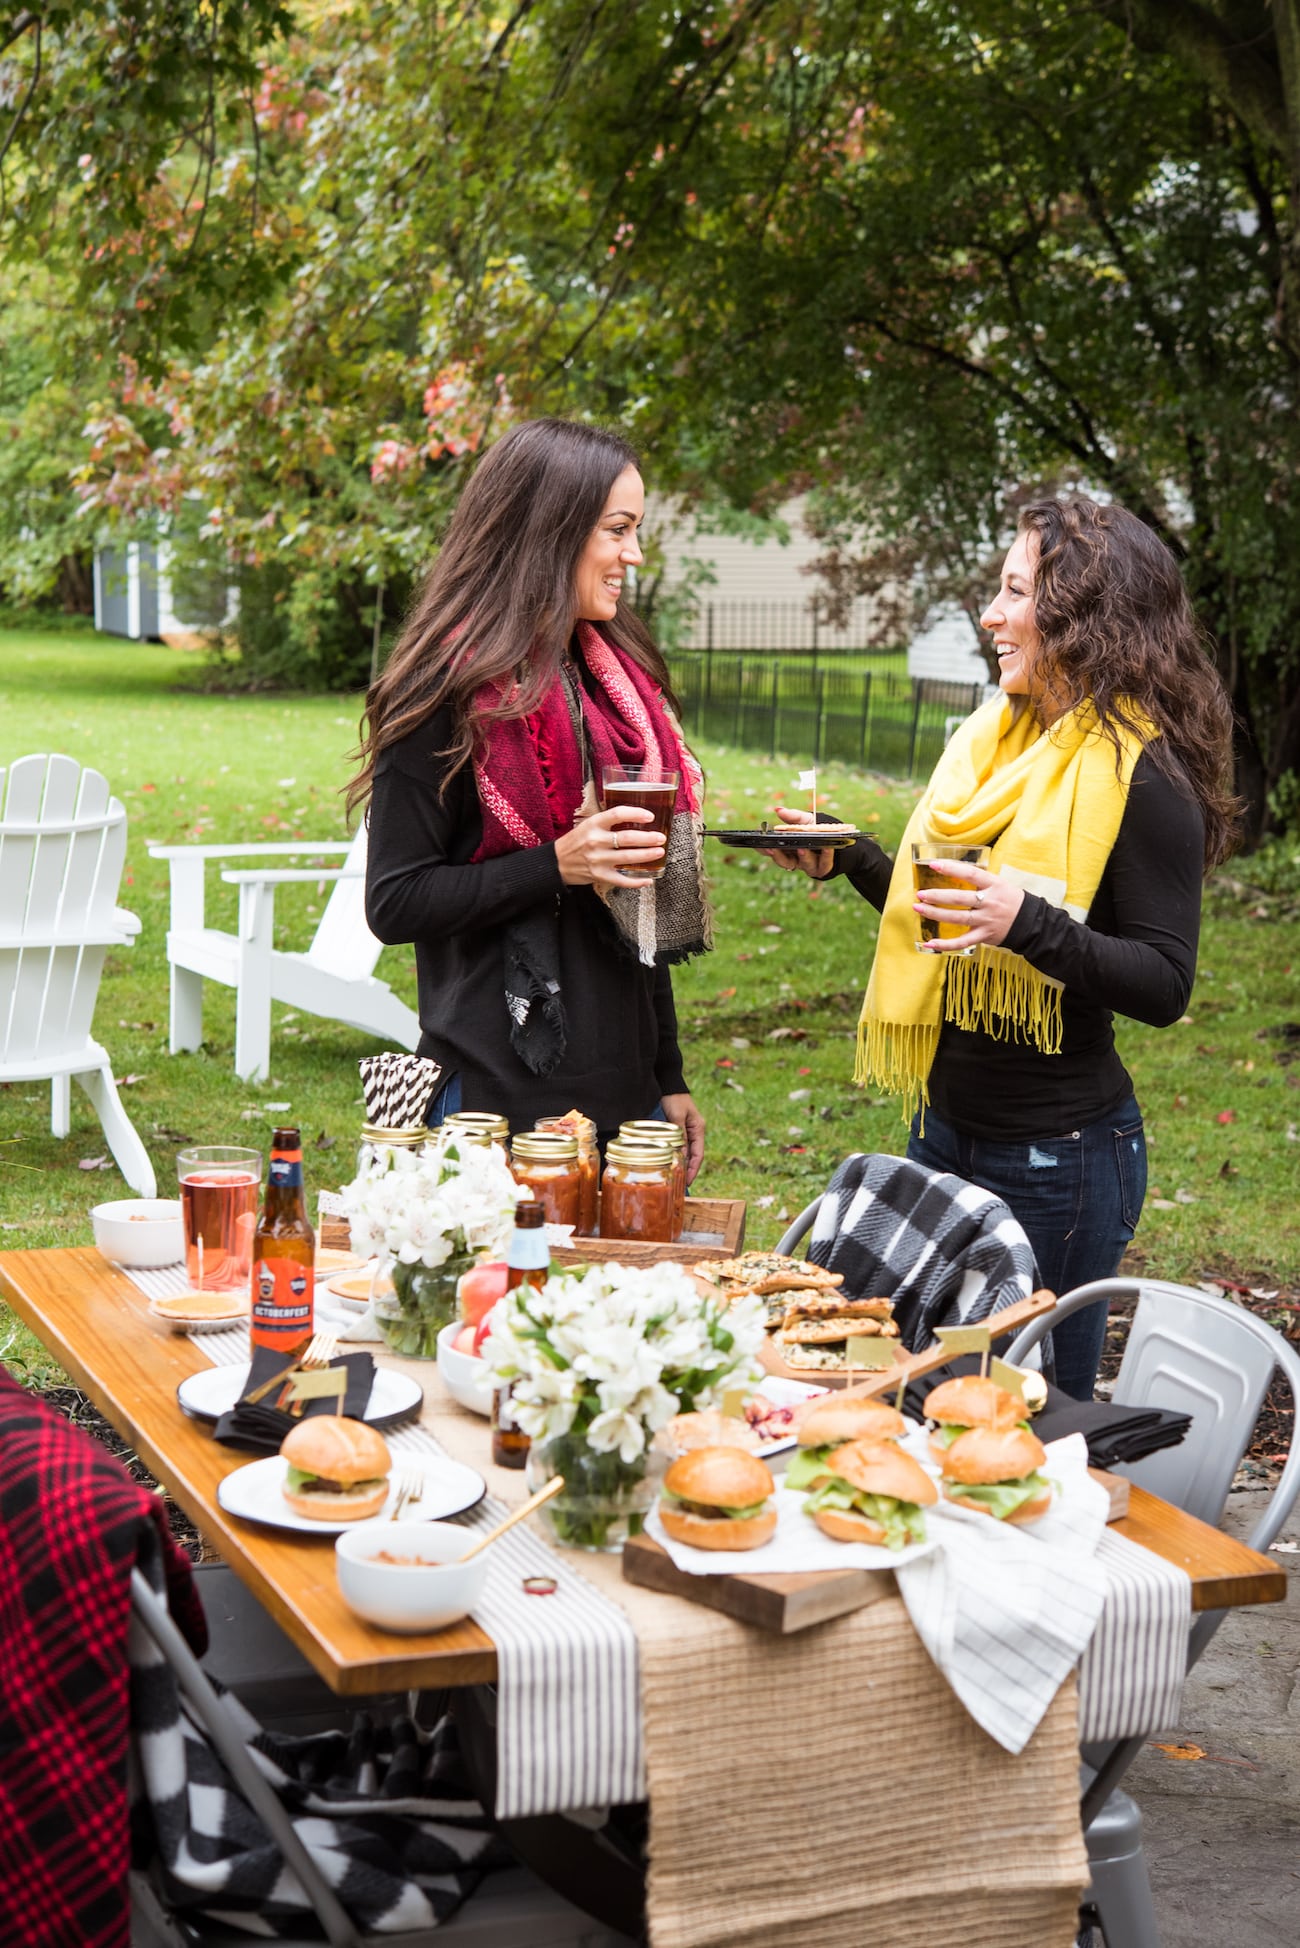 A Festive Fall Tailgate Party from Entertaining Blog @cydconverse